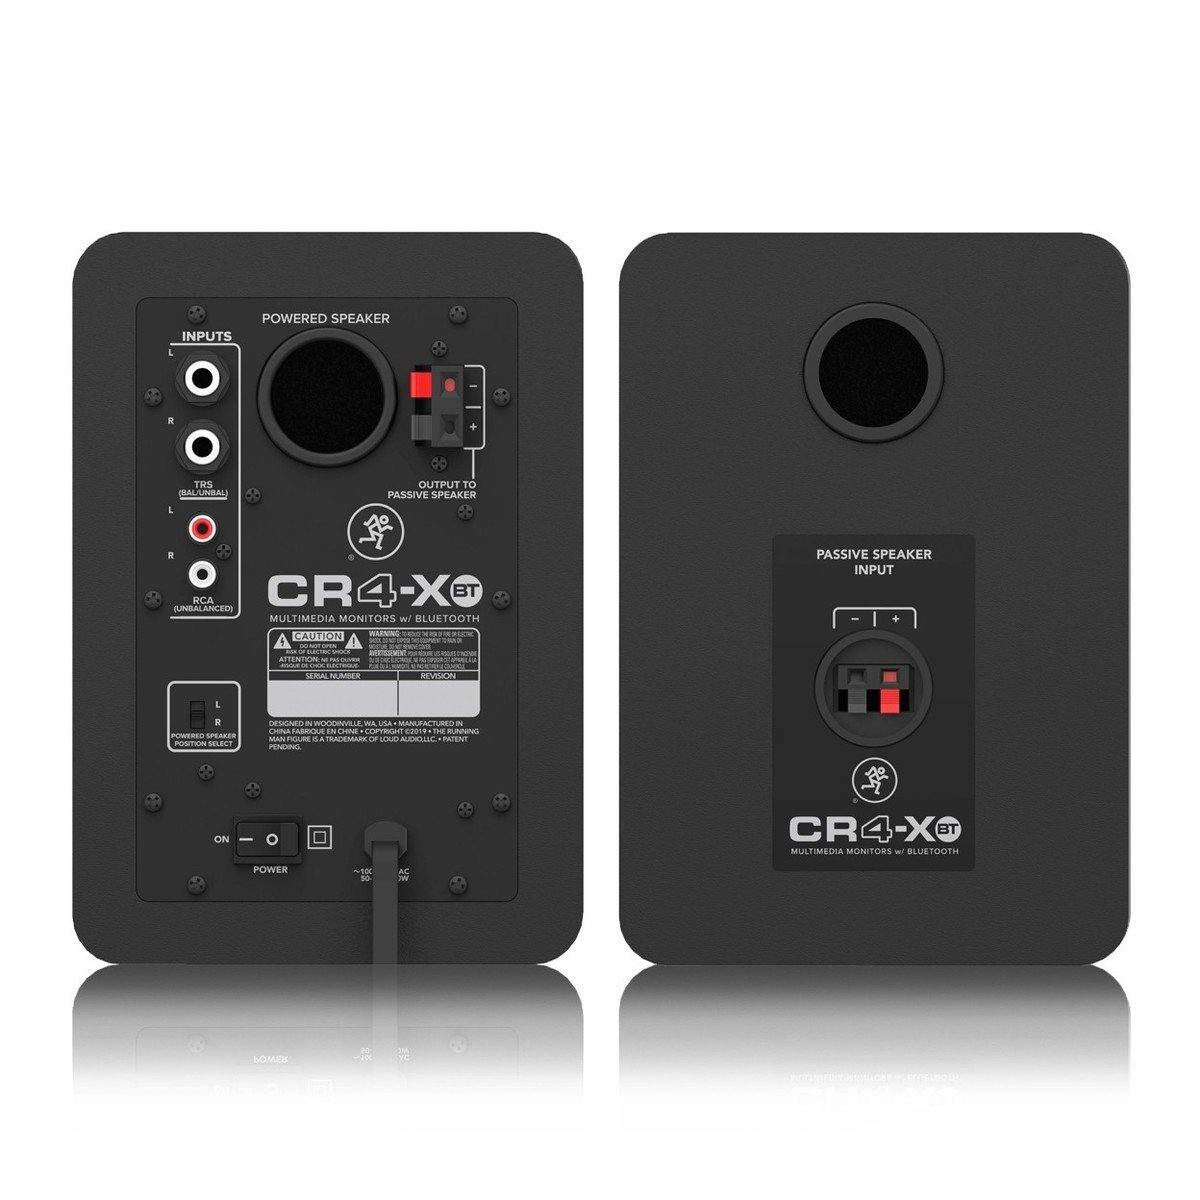 Mackie CR4-XBT 4" Multimedia Monitors with Bluetooth - DY Pro Audio